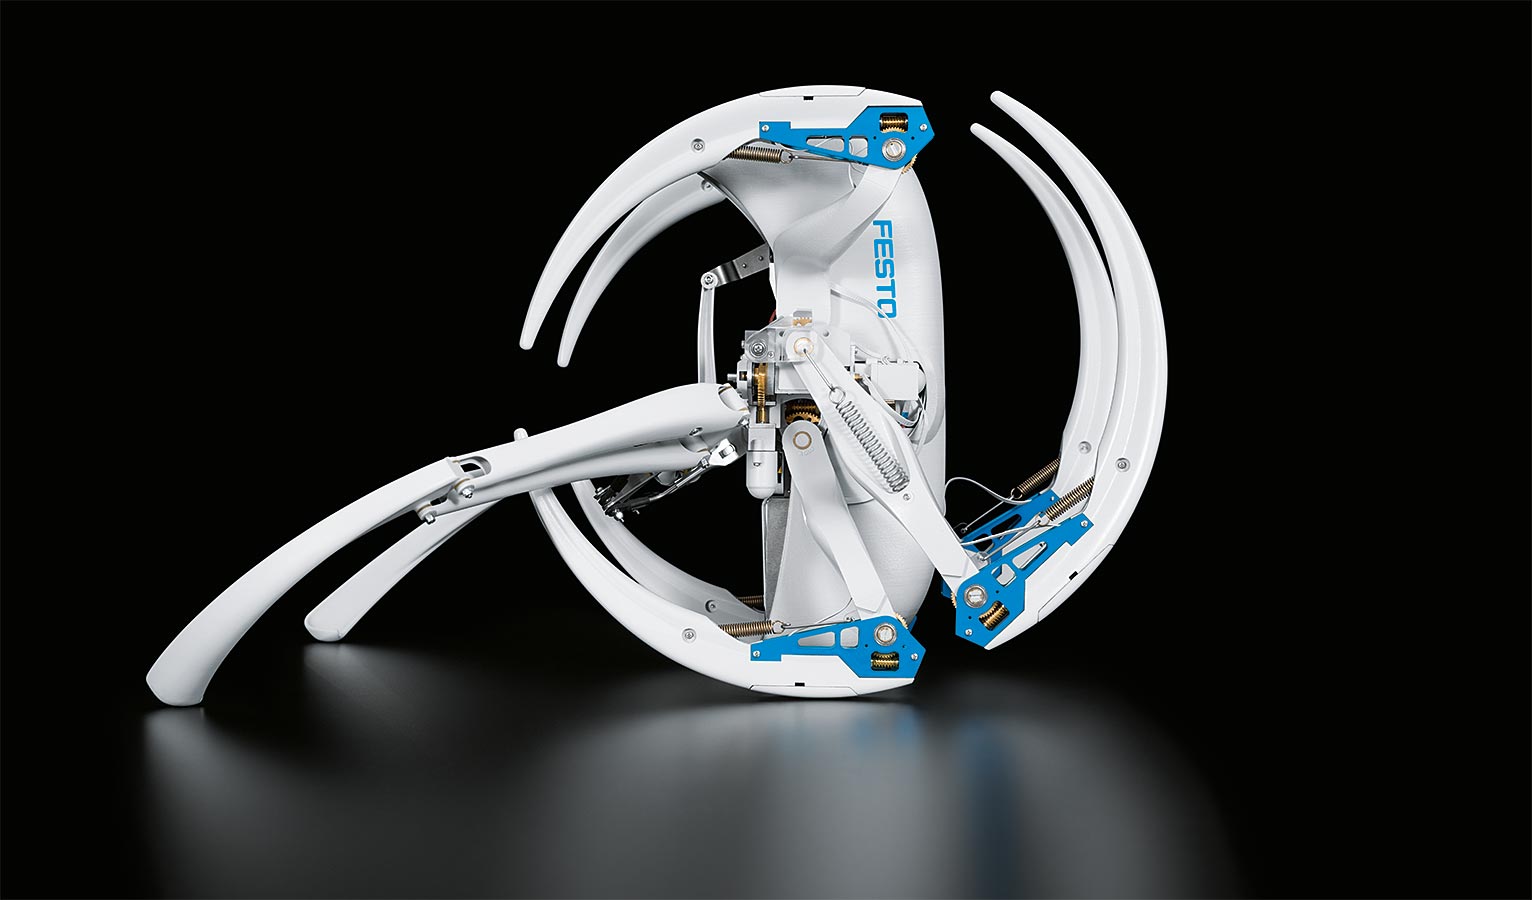 BionicWheelBot pushes off with its extended seventh and eighth legs in rolling mode. Source: Festo